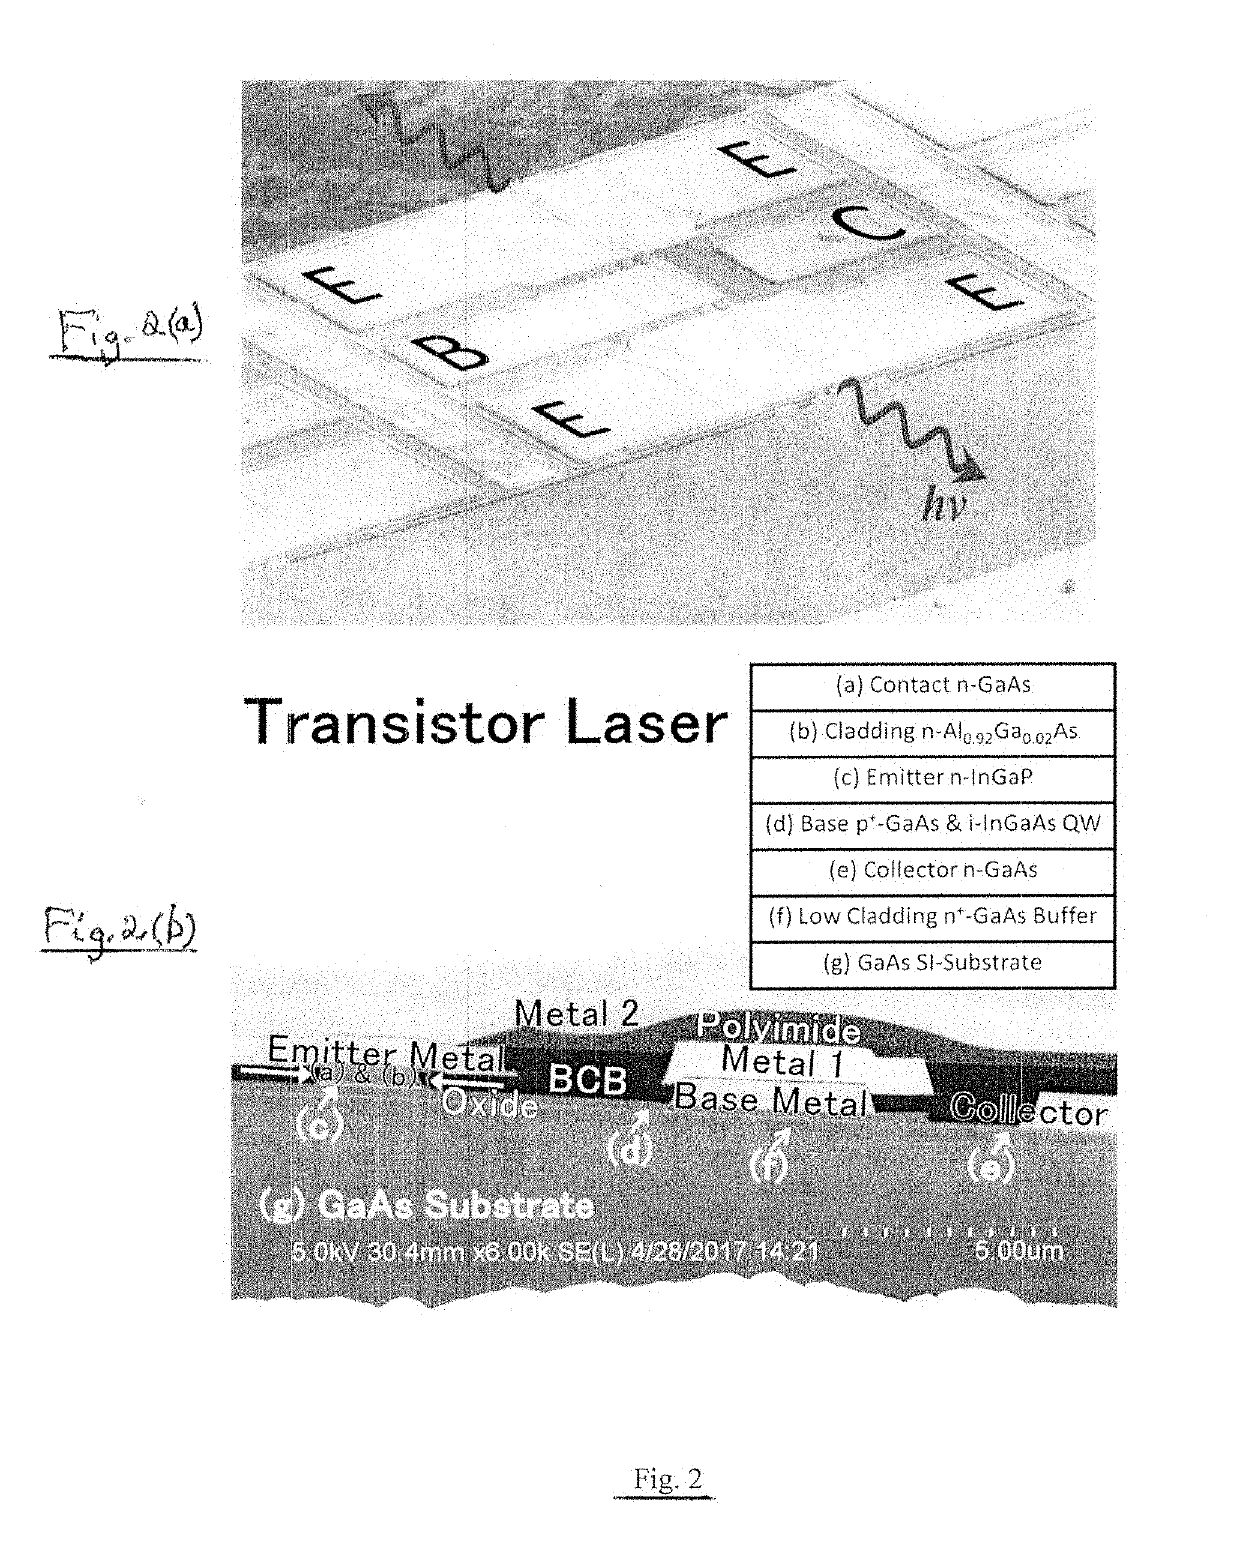 Transistor laser electrical and optical bistable switching